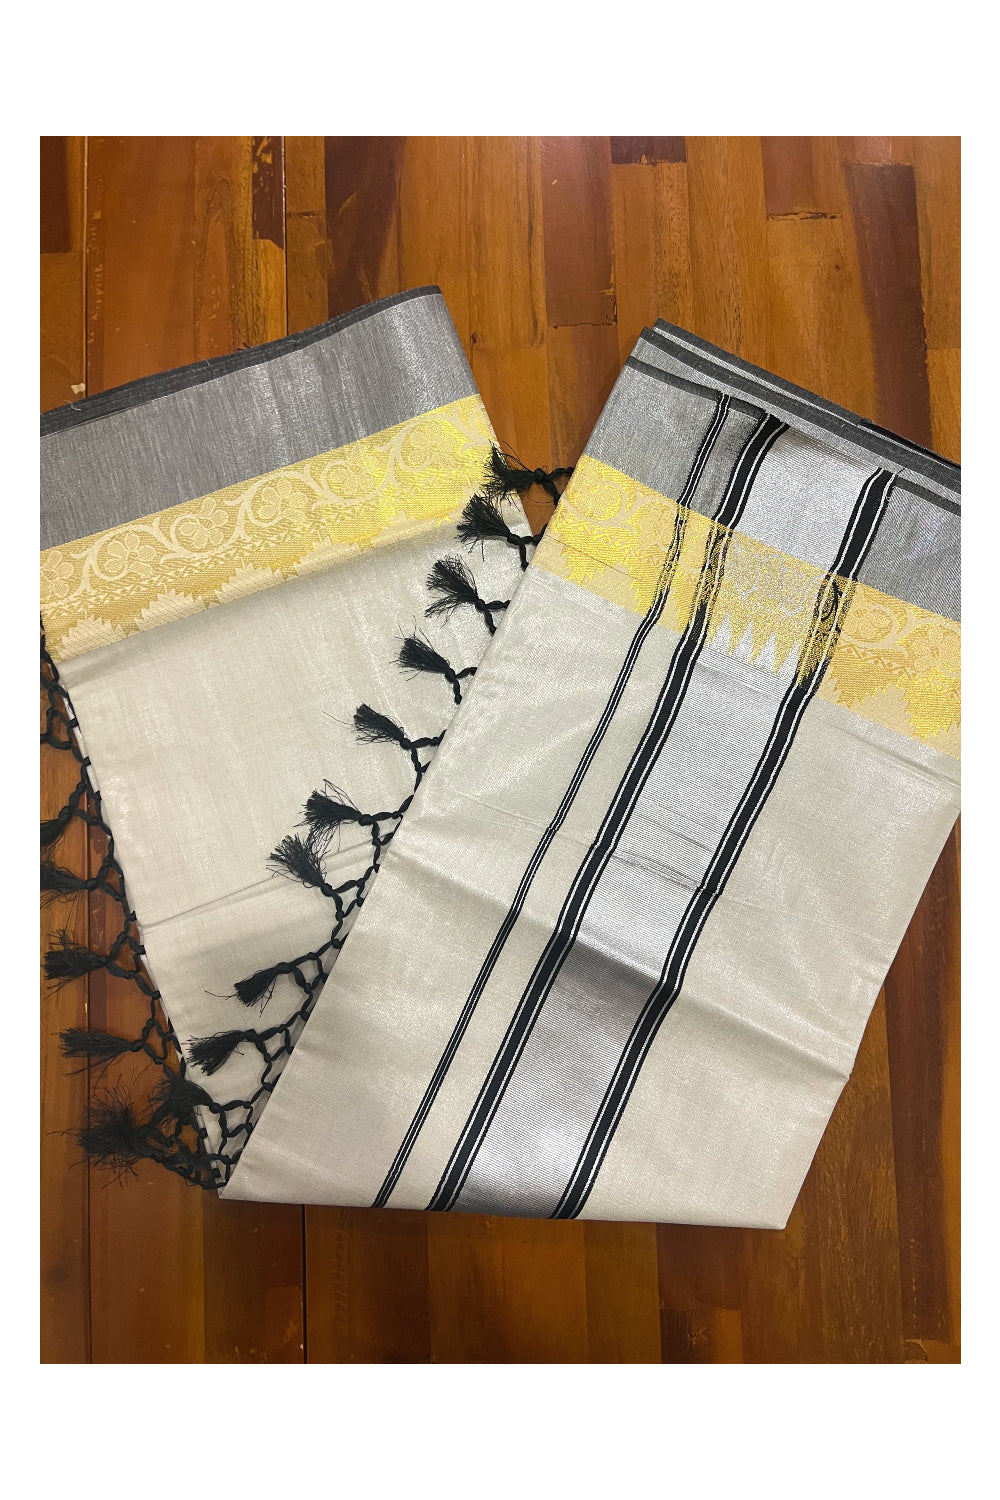 Kerala Silver Tissue Plain Saree with Black and Golden Floral Self Work Border